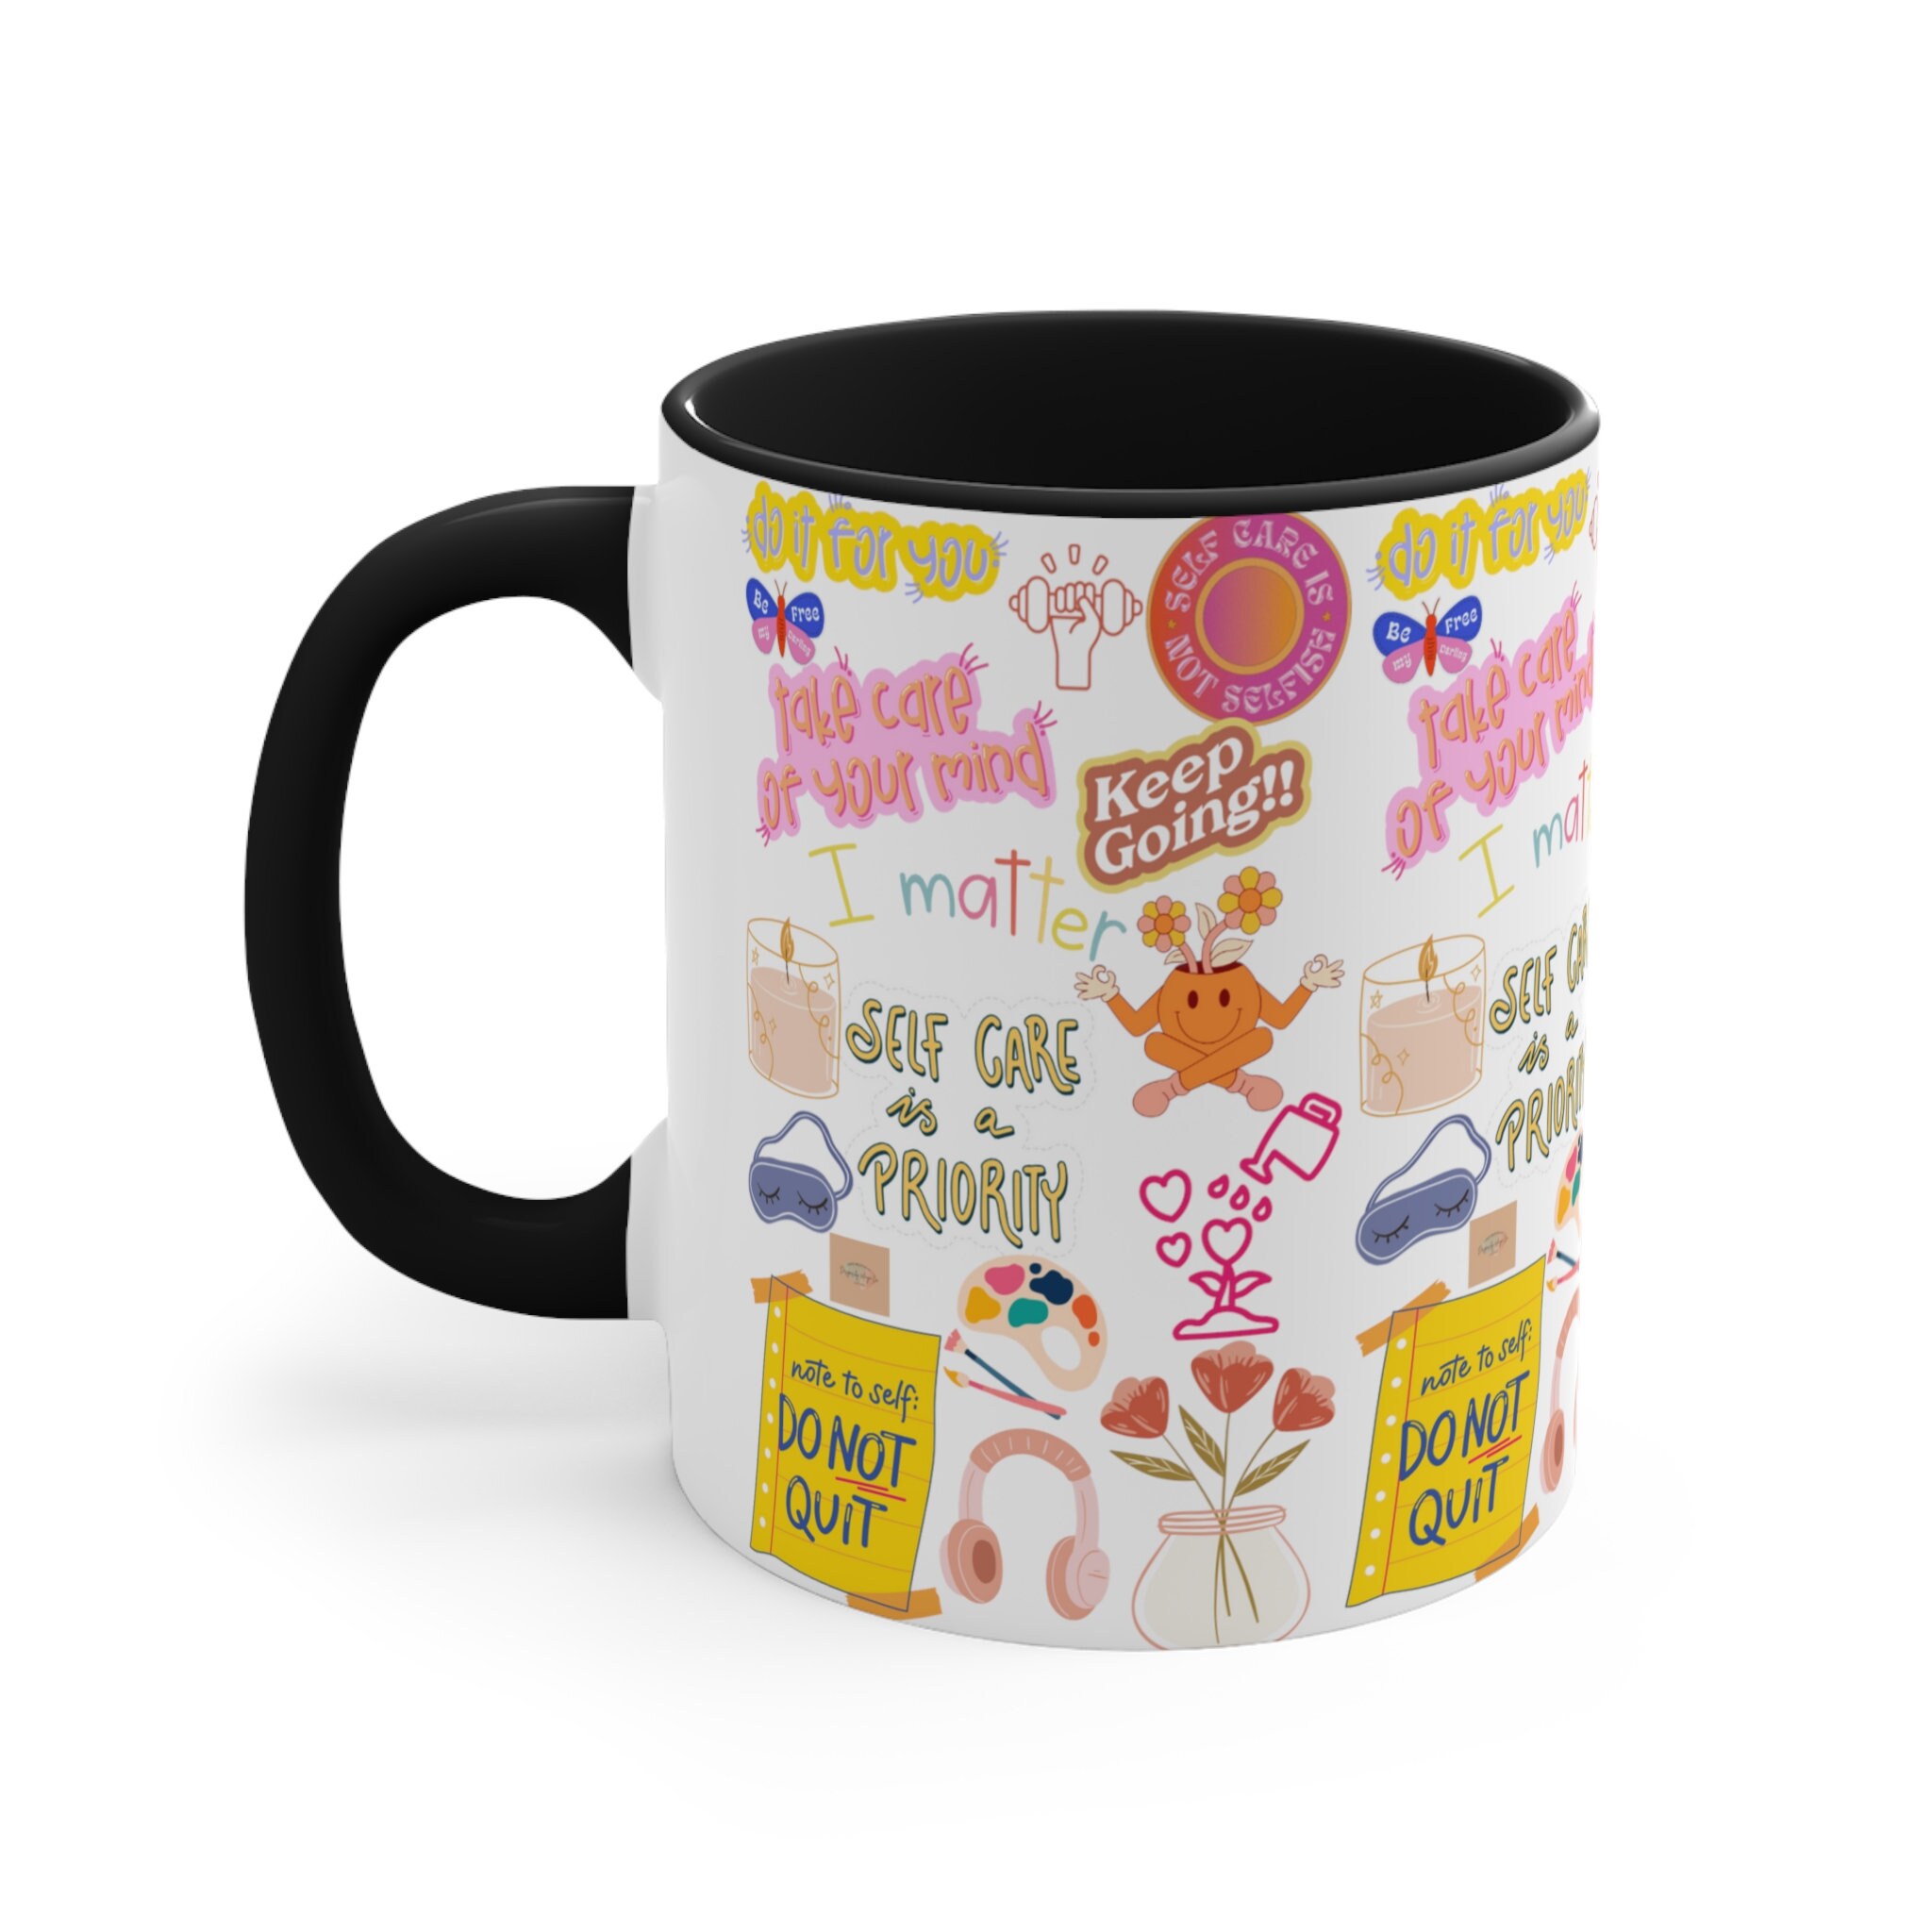 Self-care for Her Mug, Self-care, Inspirational, Gifts for Her, Empower ...